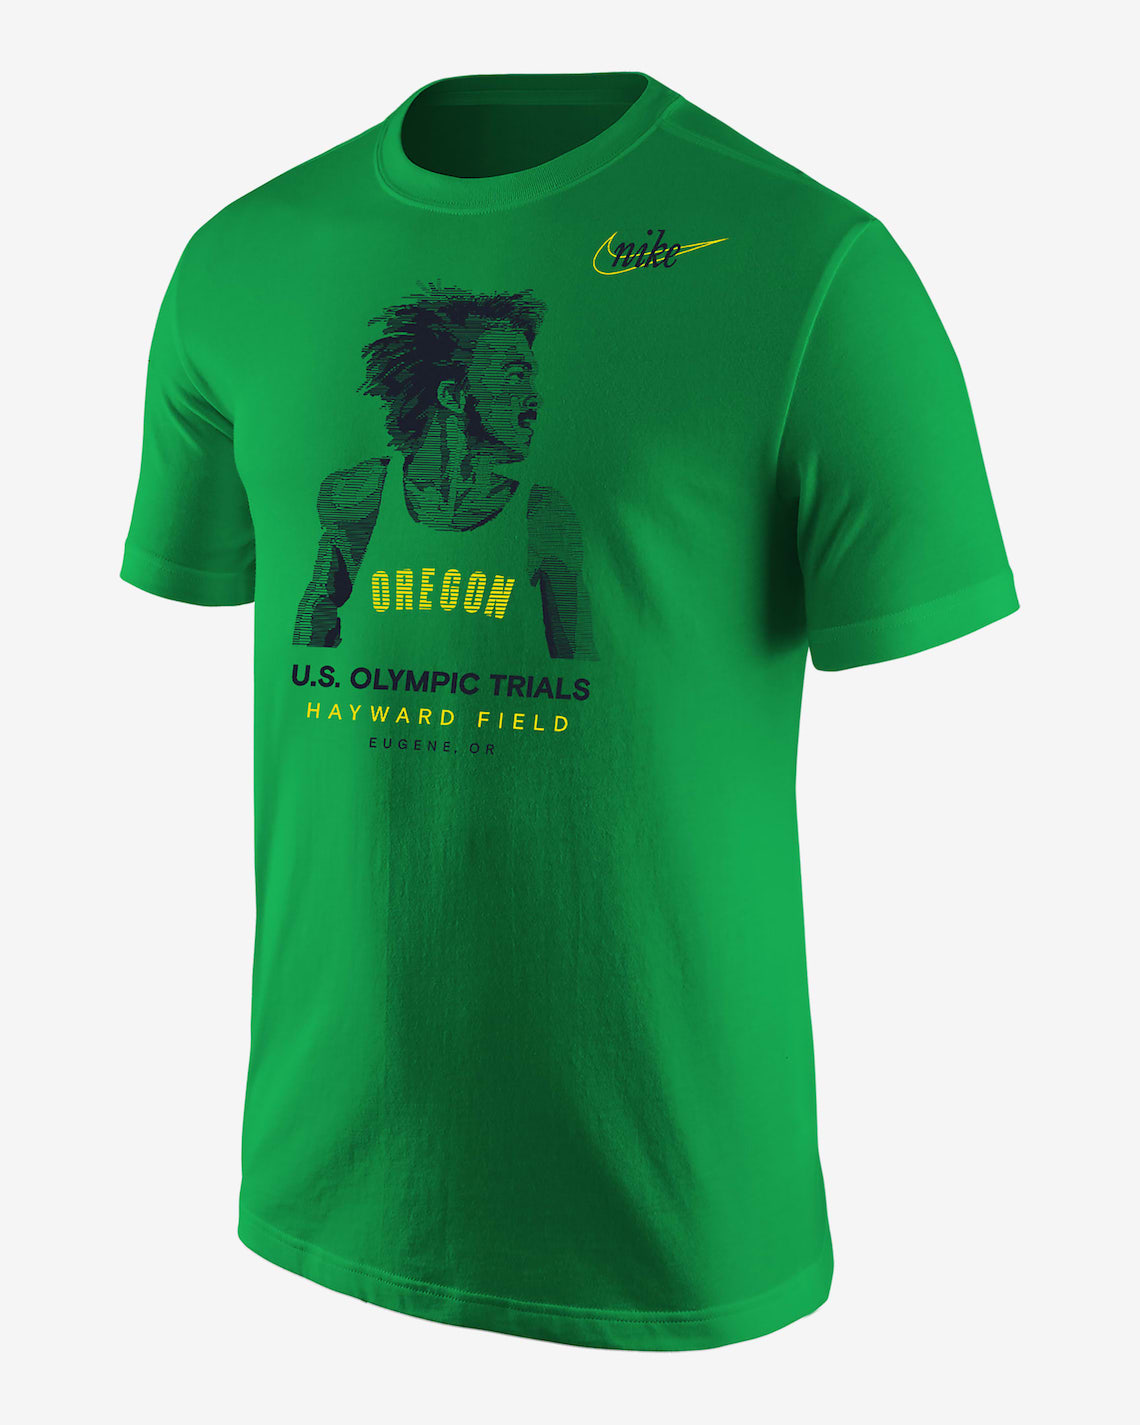 Nike Hayward Field Collection 2020 US Olympic Trials | SneakerNews.com